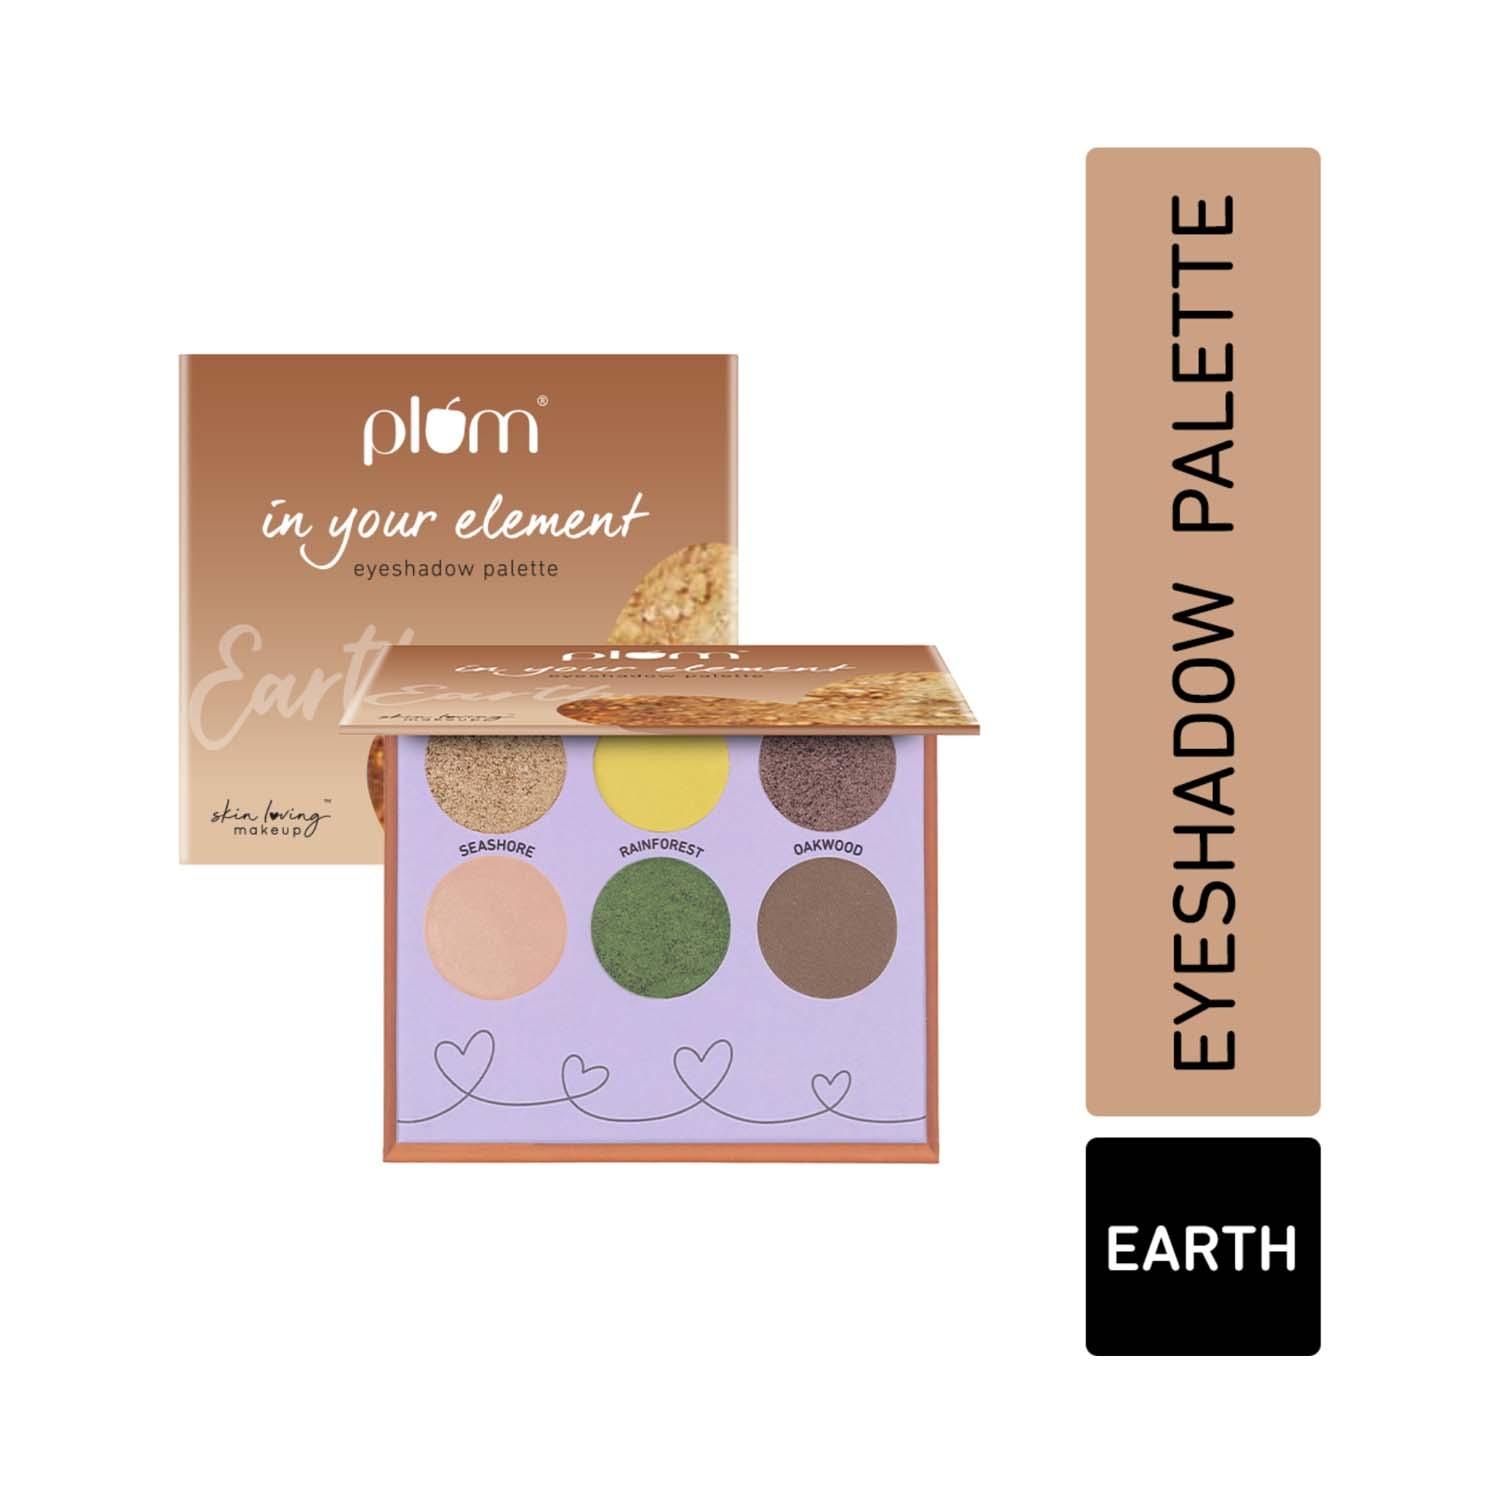 plum 6-in-1 super pigmented in your element eyeshadow palette - 03 earth (10g)